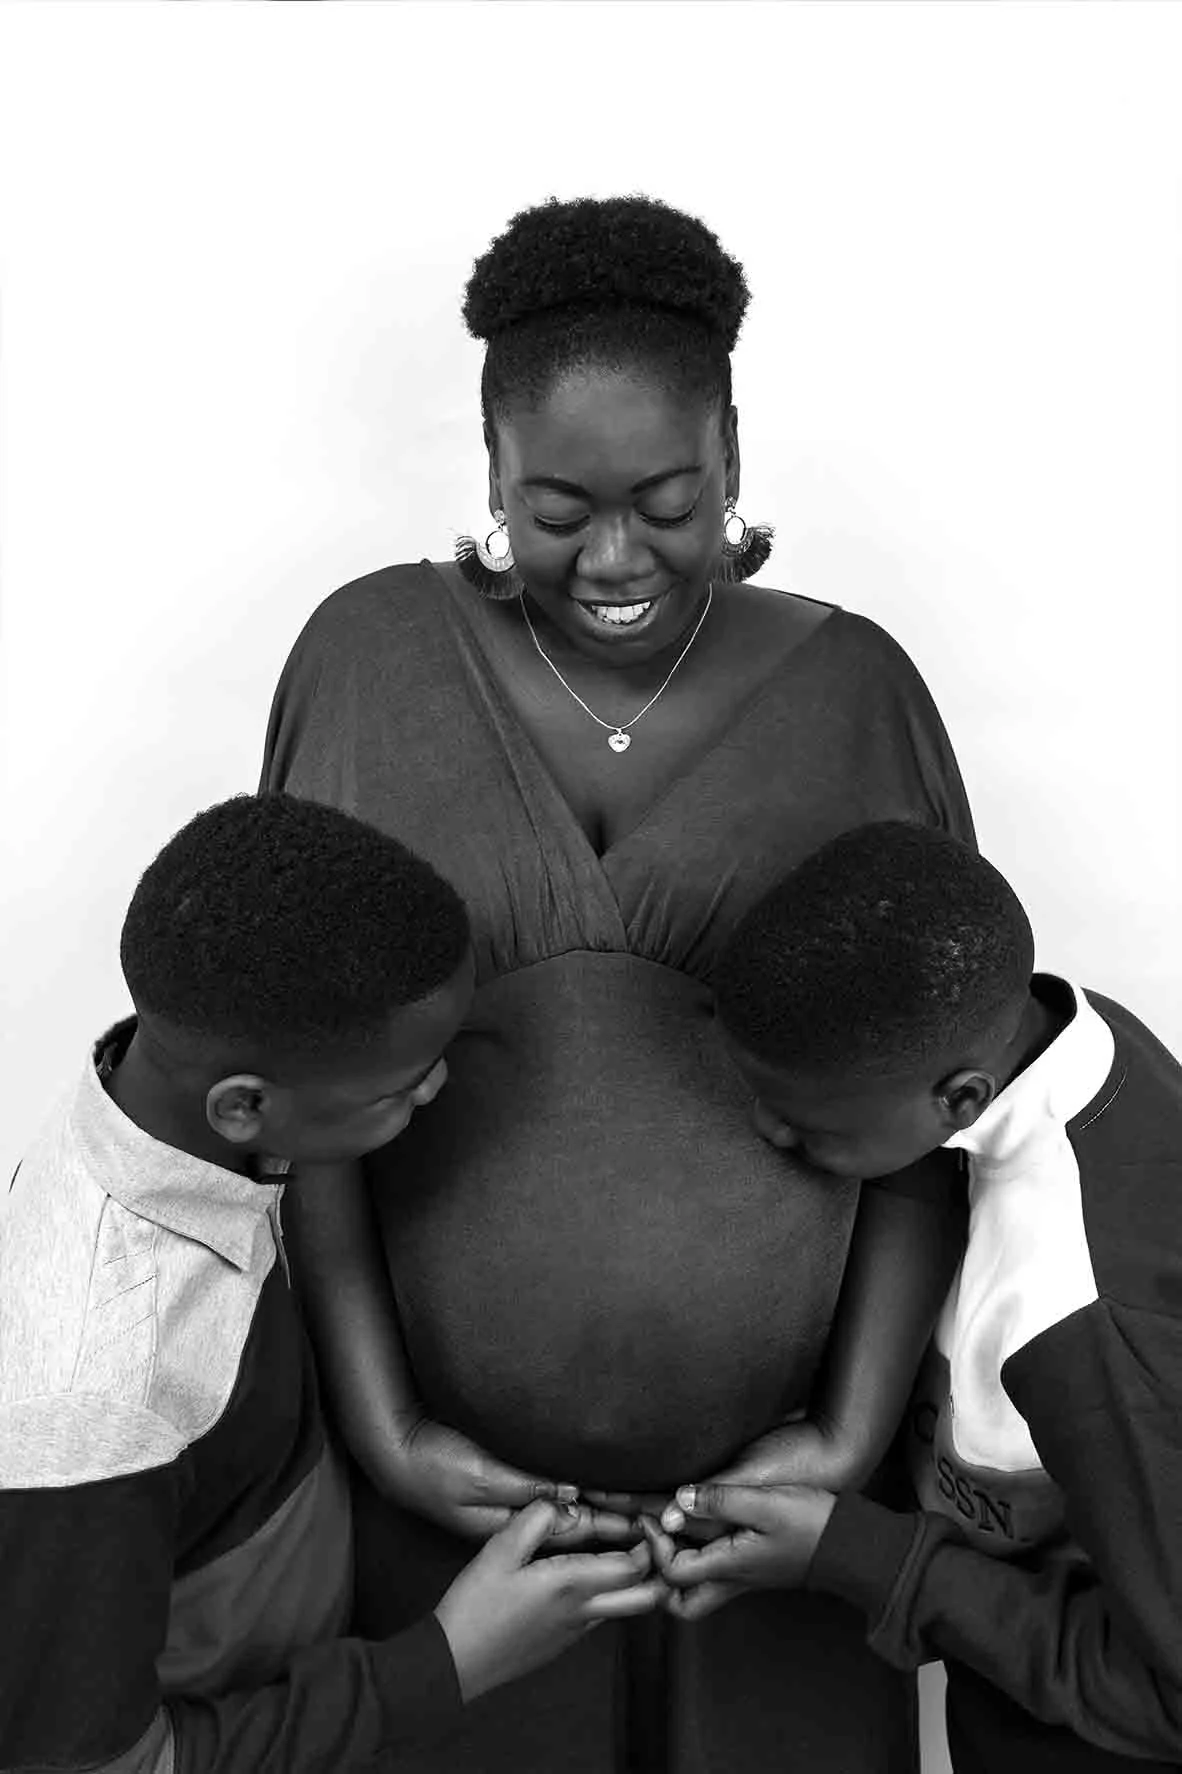 Maternity photos with brothers kissing baby bump